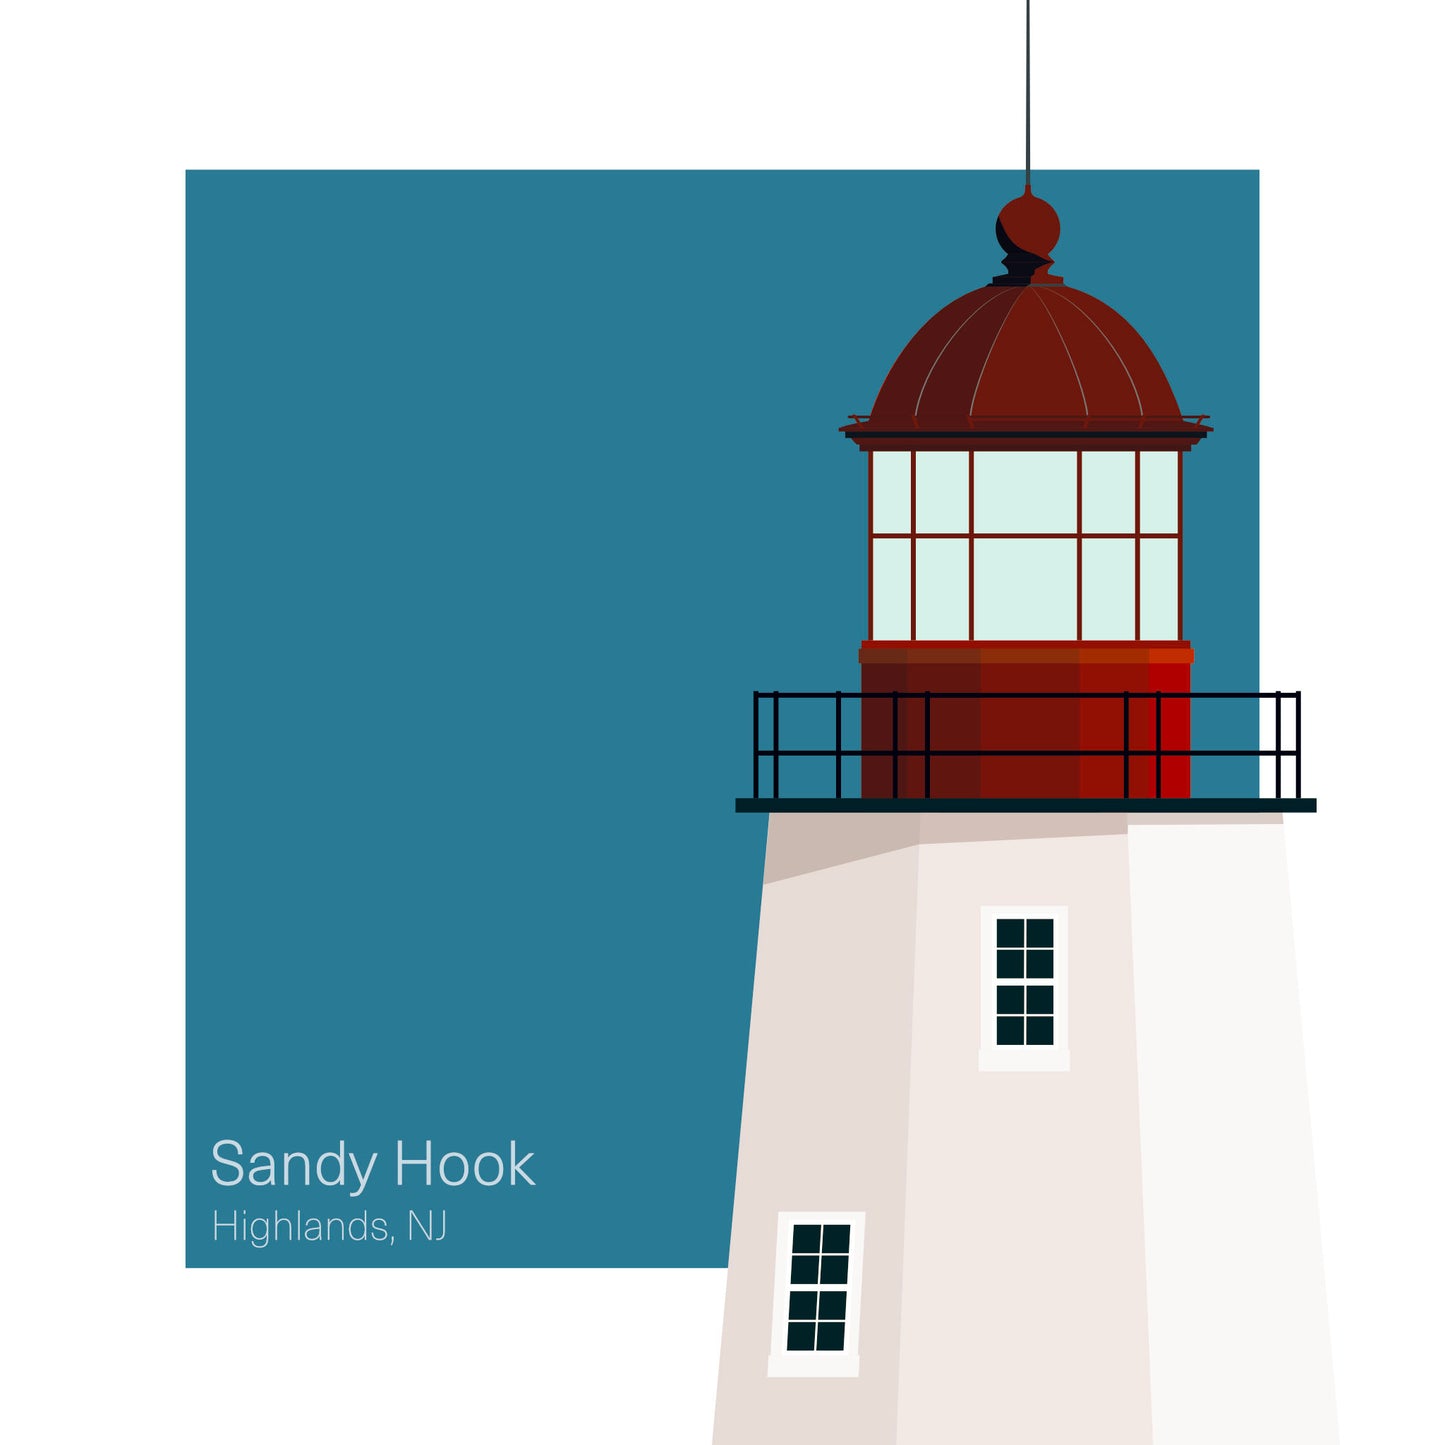 Illustration of the Sandy Hook lighthouse, NJ, USA. On a white background with aqua blue square as a backdrop.